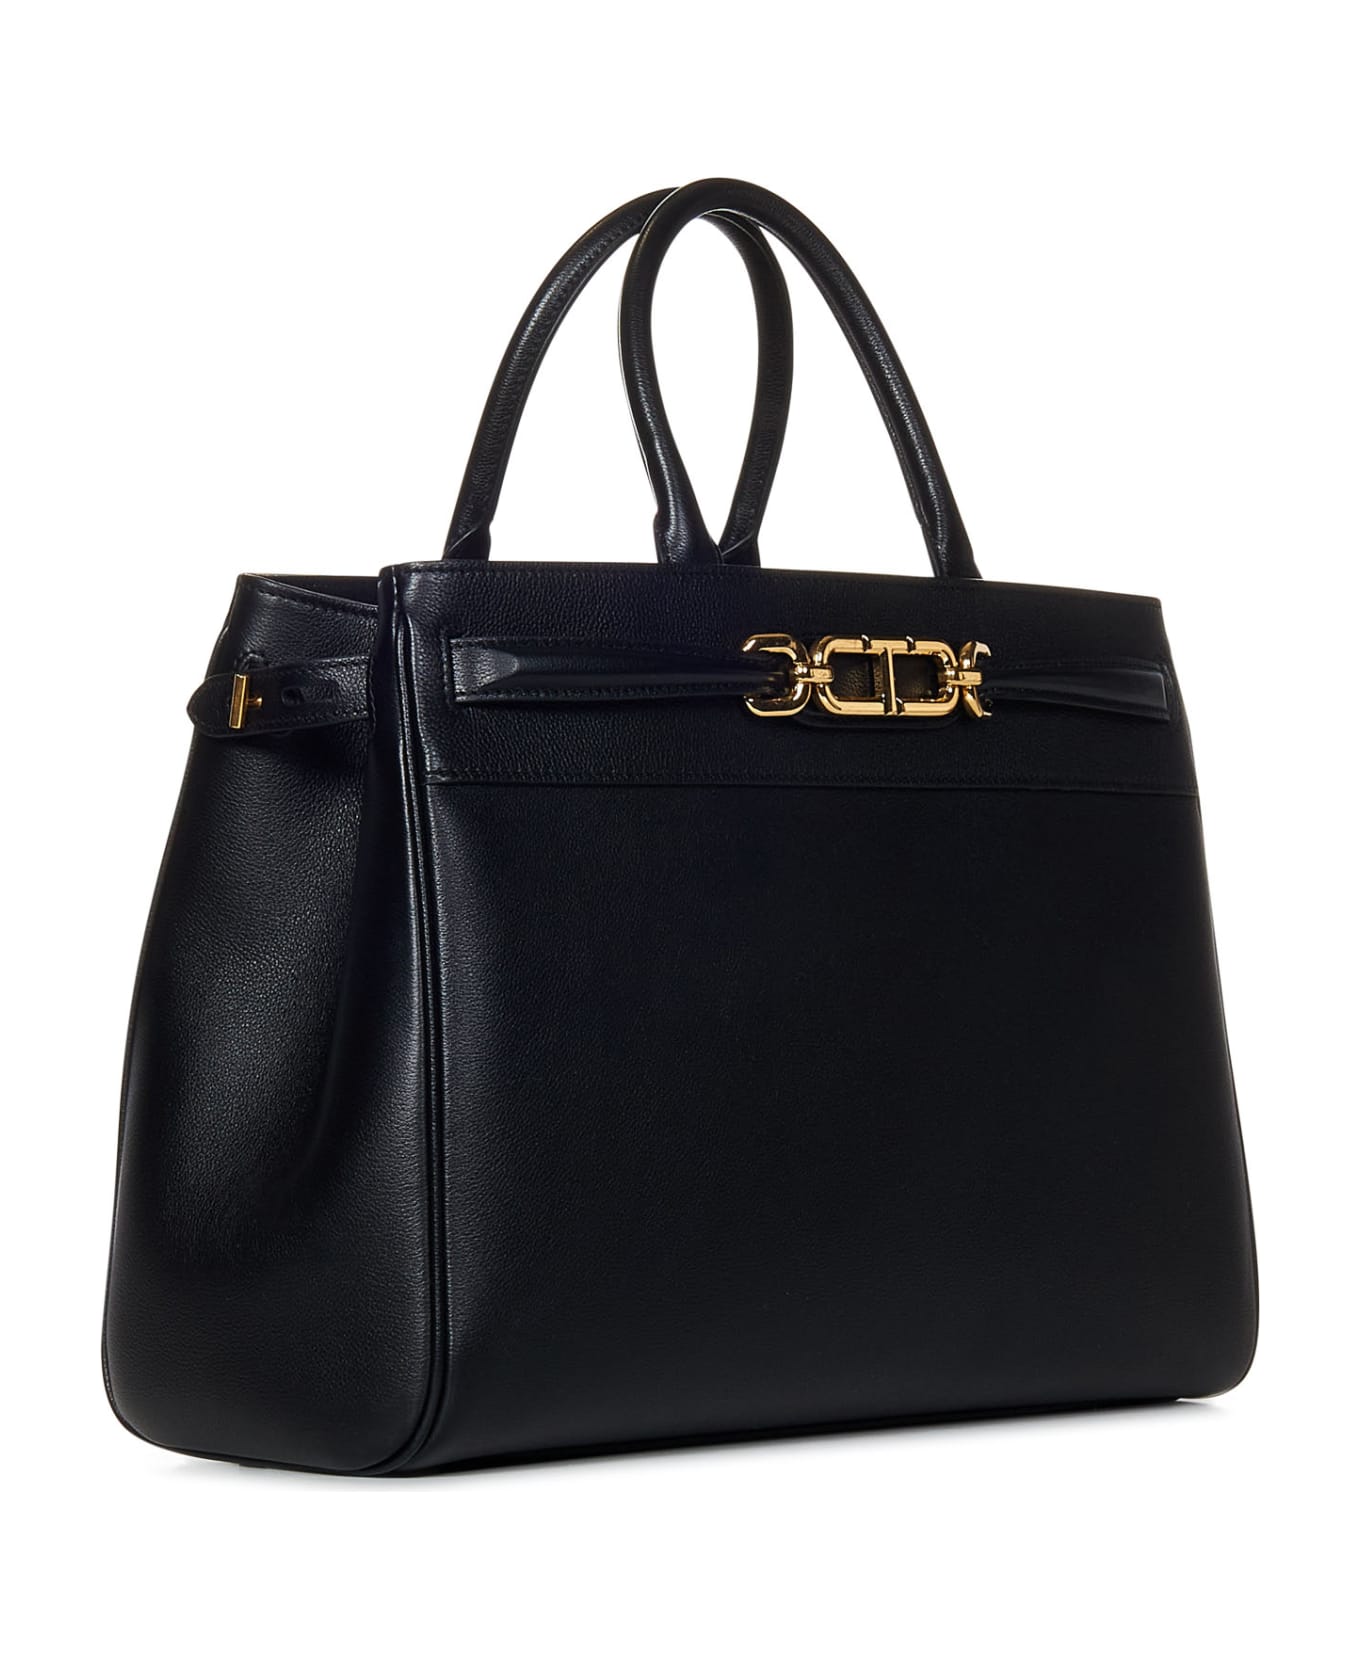 Tom Ford Whitney Large Tote - BLACK トートバッグ